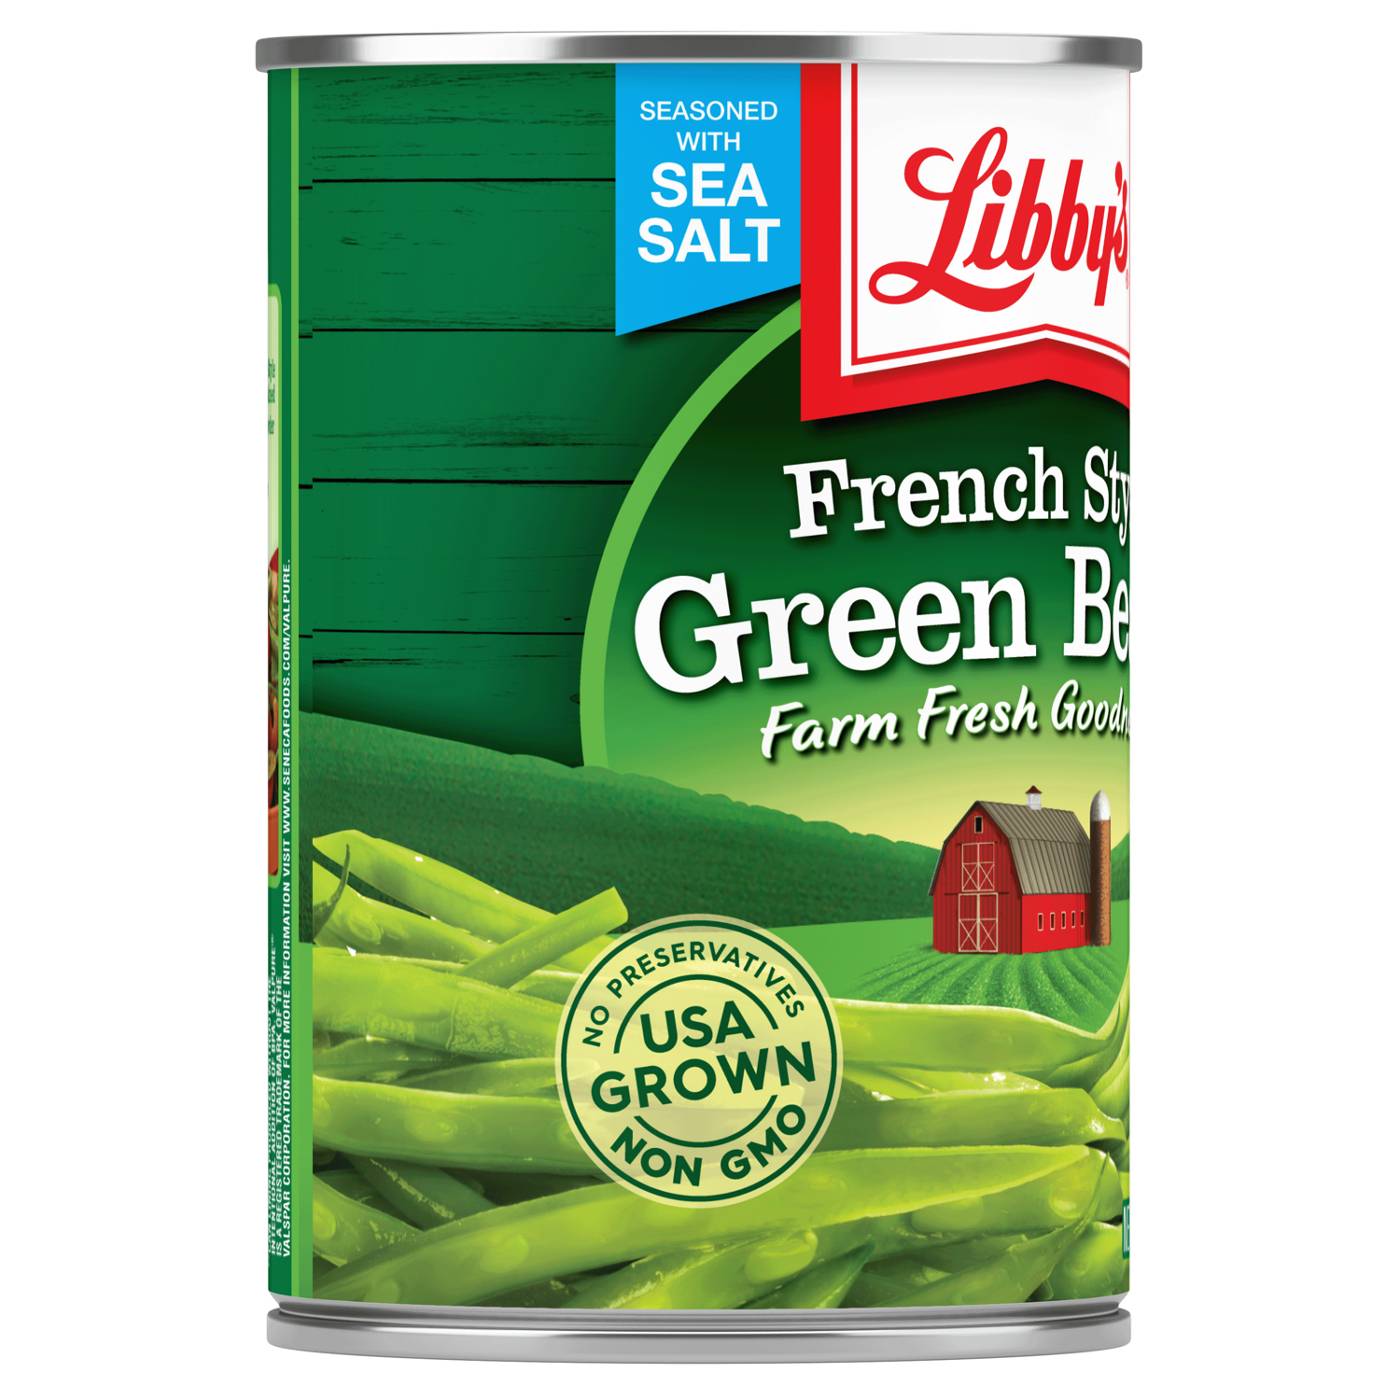 Libby's French Style Green Beans; image 3 of 4